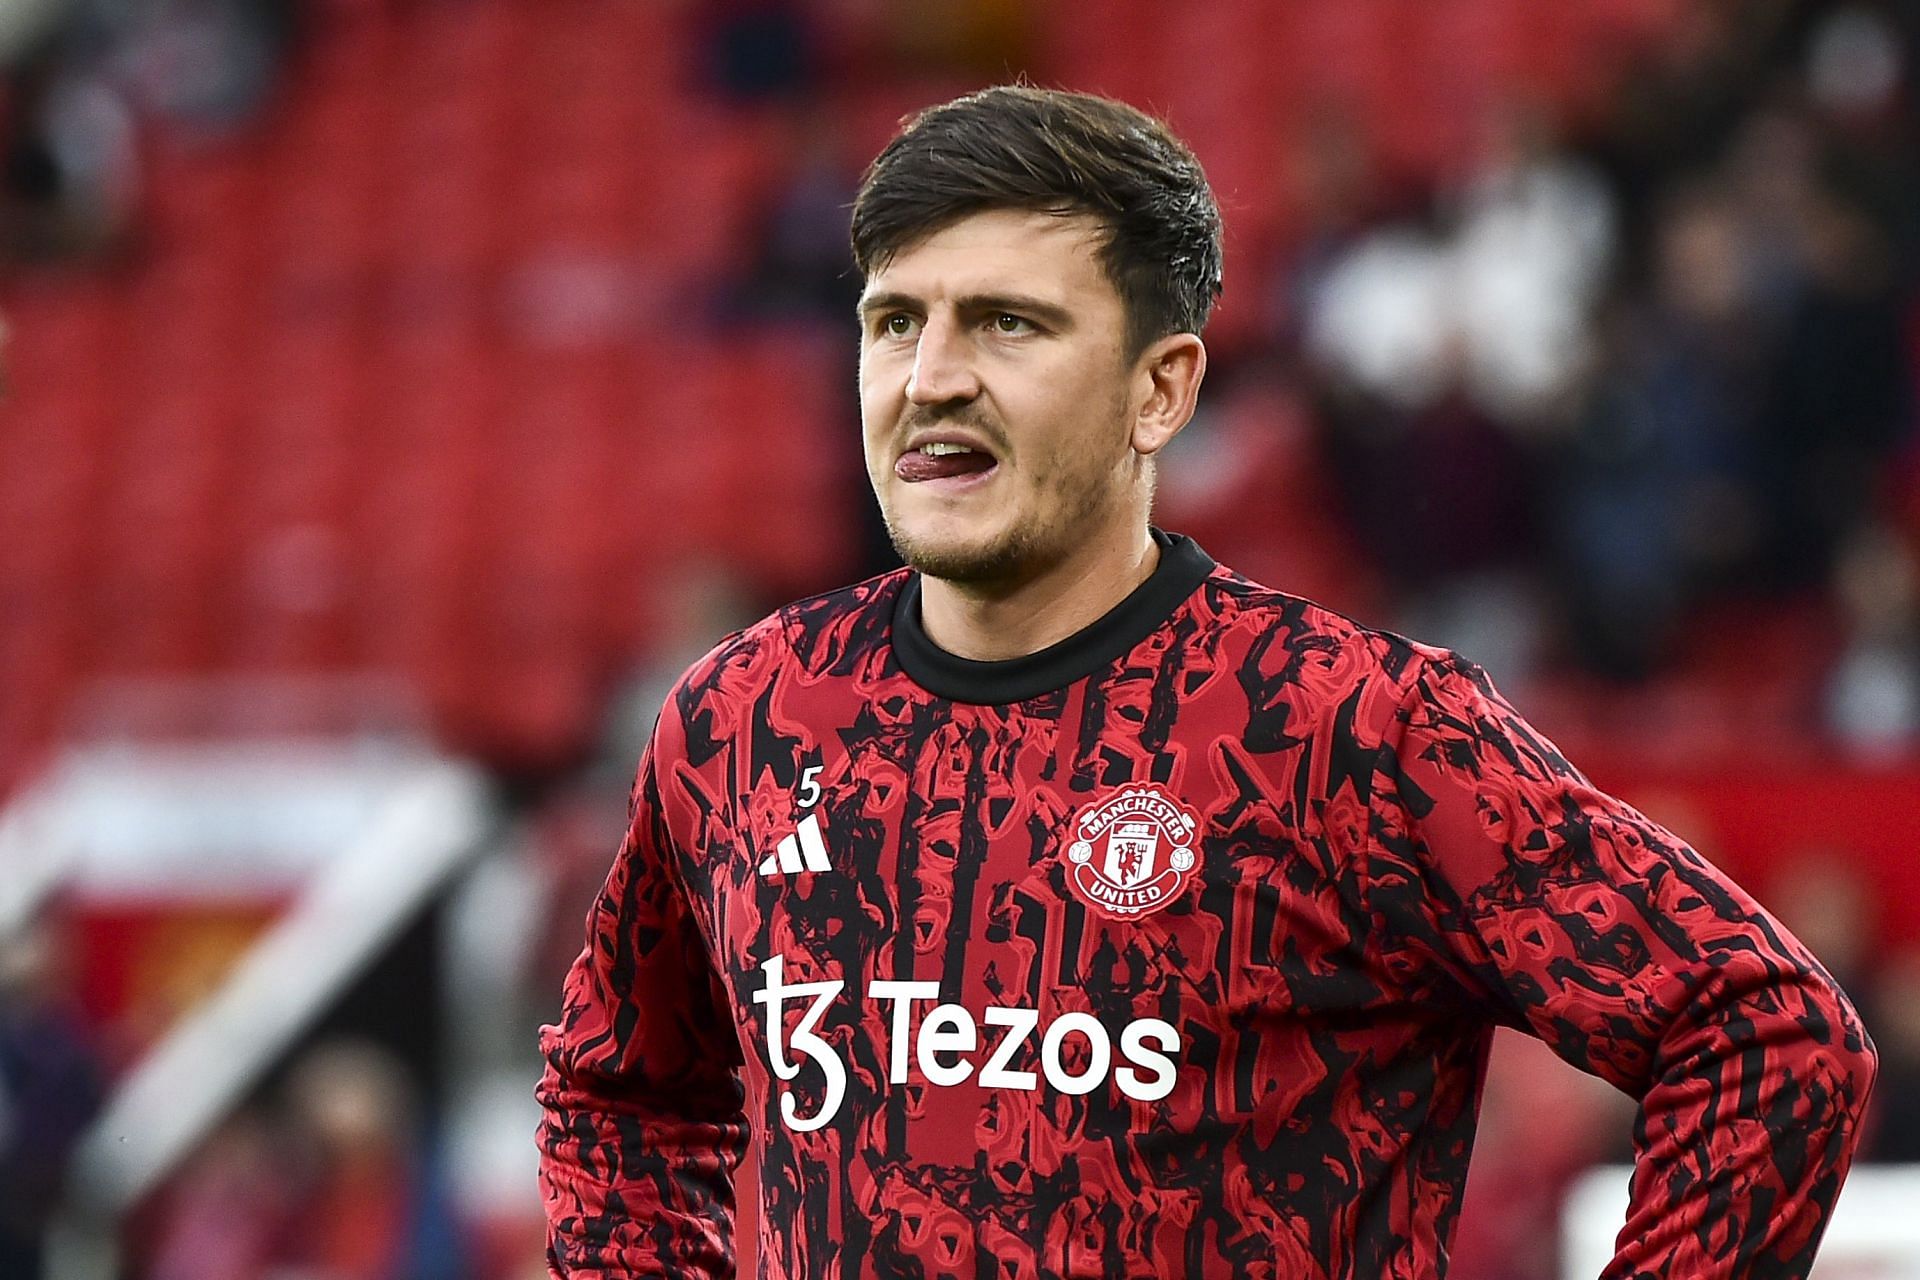 Harry Maguire has the option to move to London this summer.